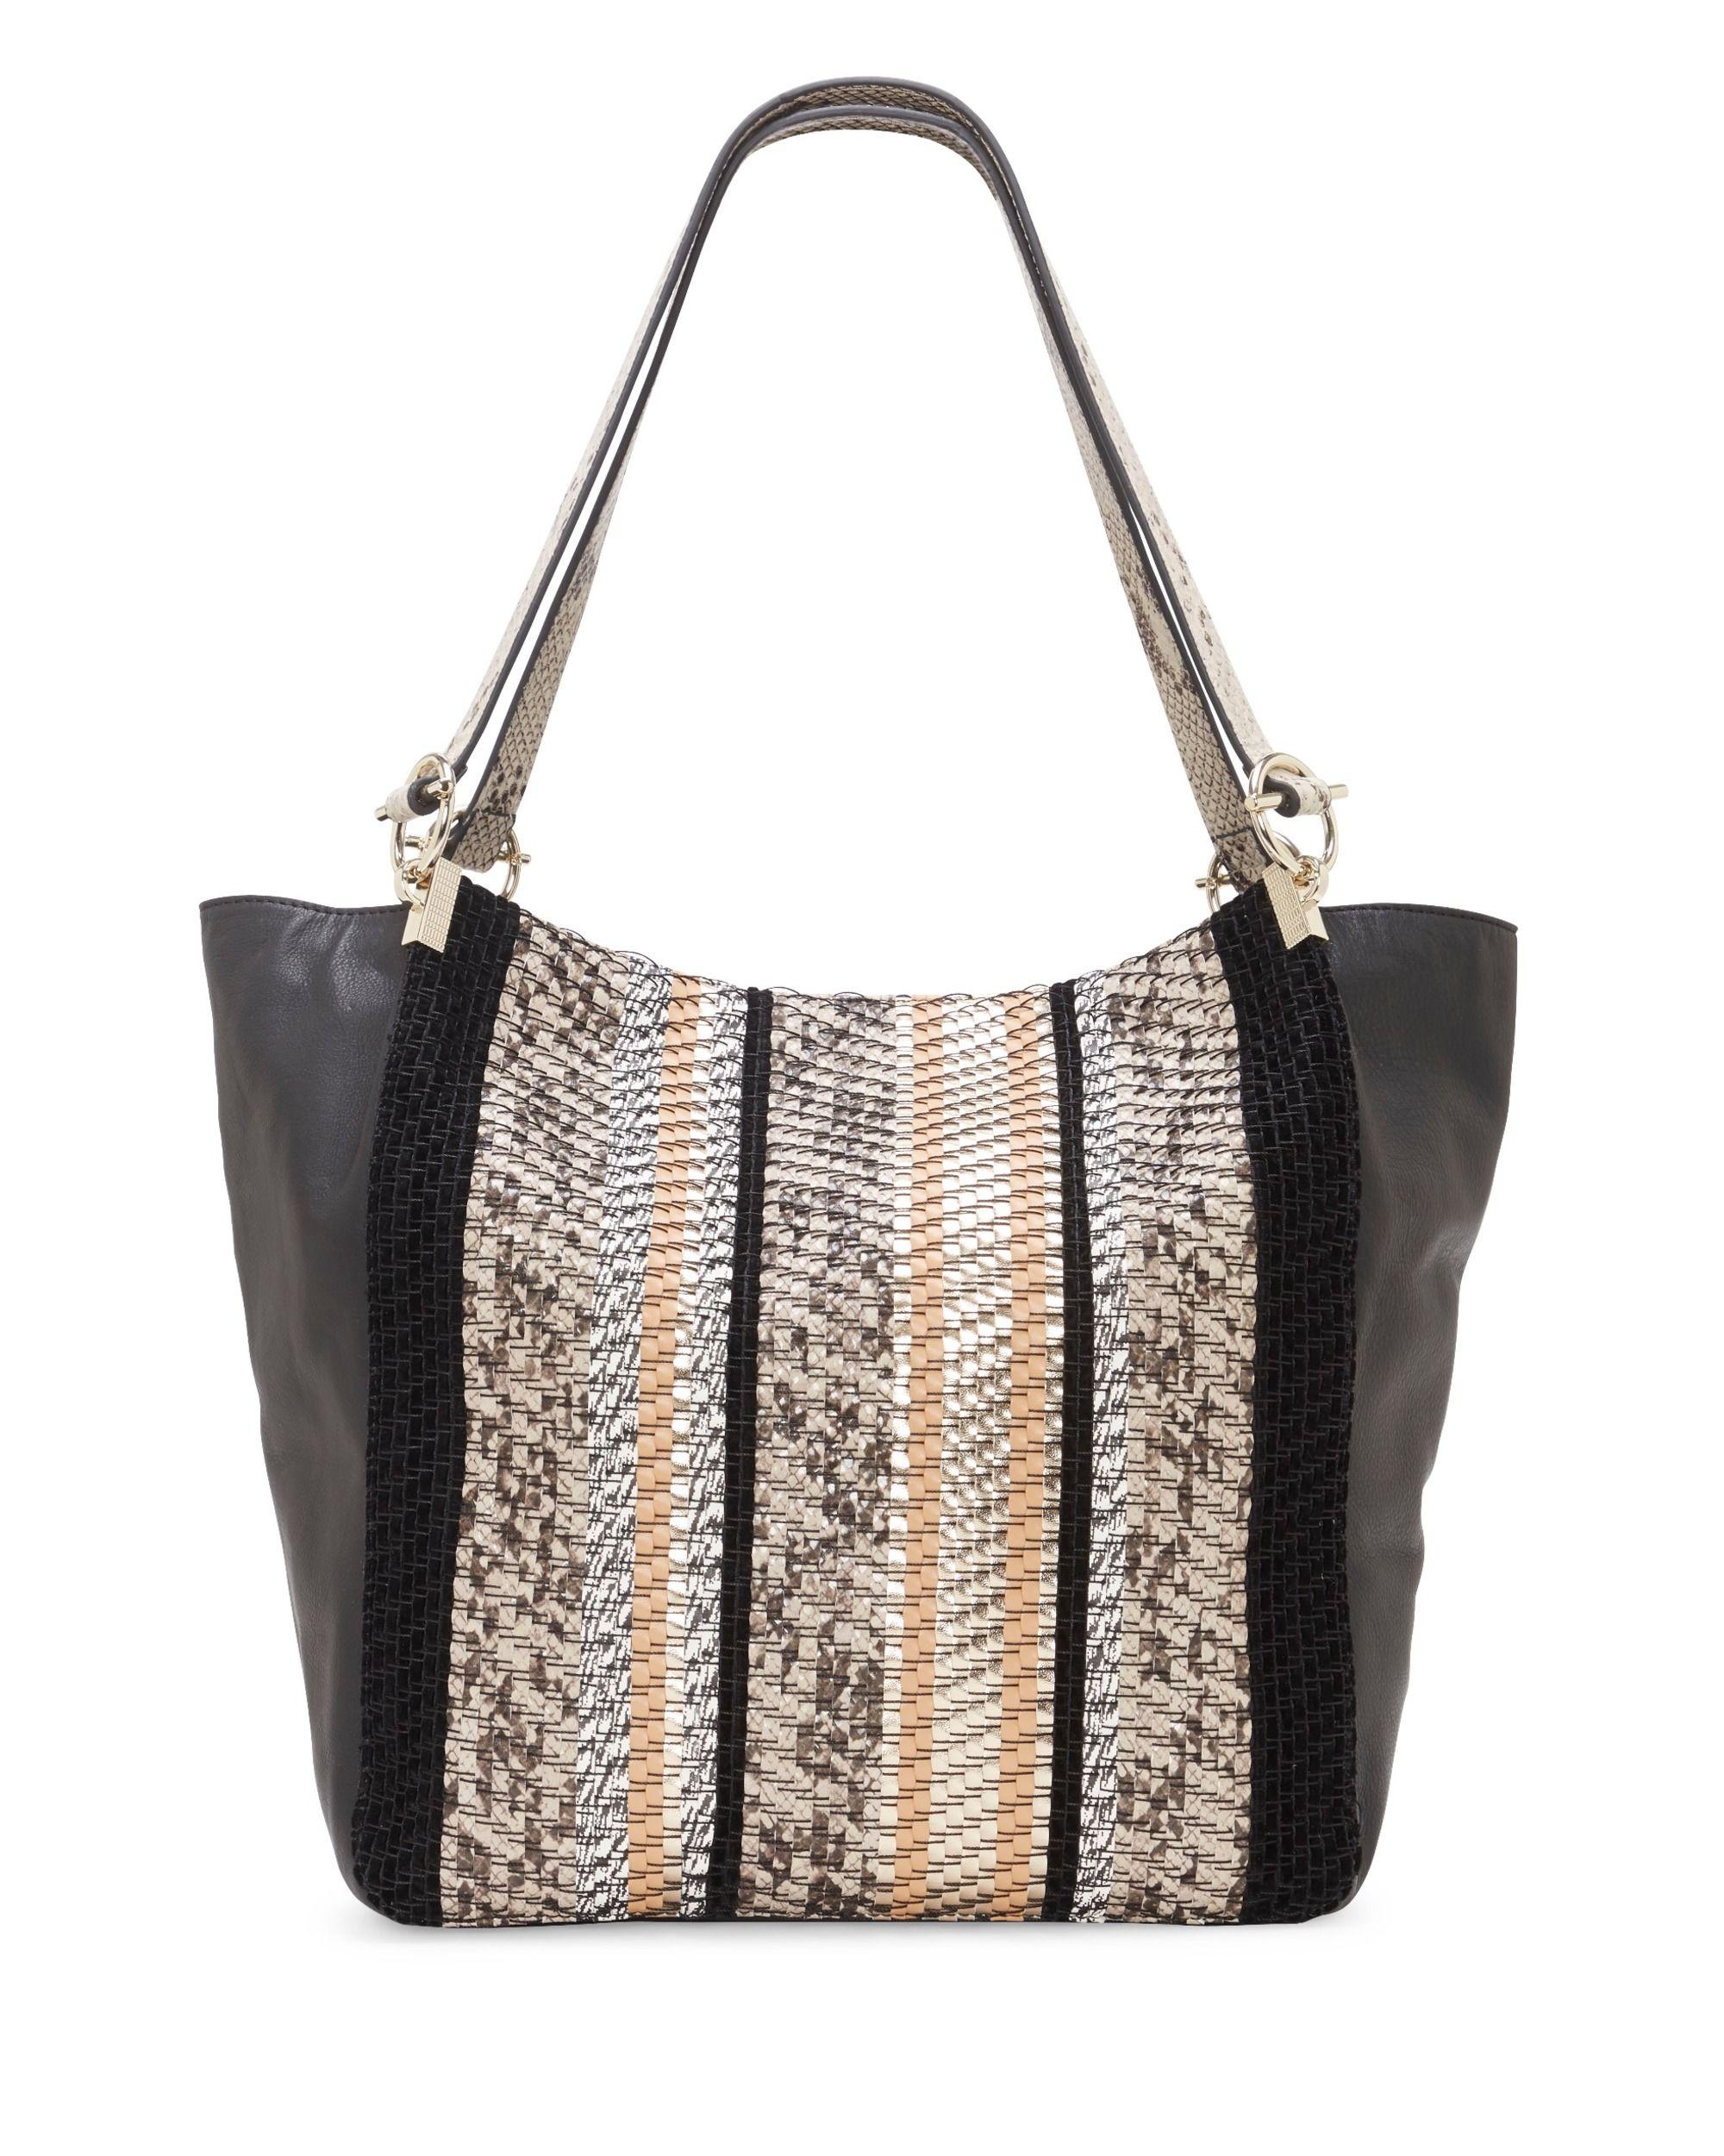 Vince Camuto Ashby Tote Bag in Black - Lyst